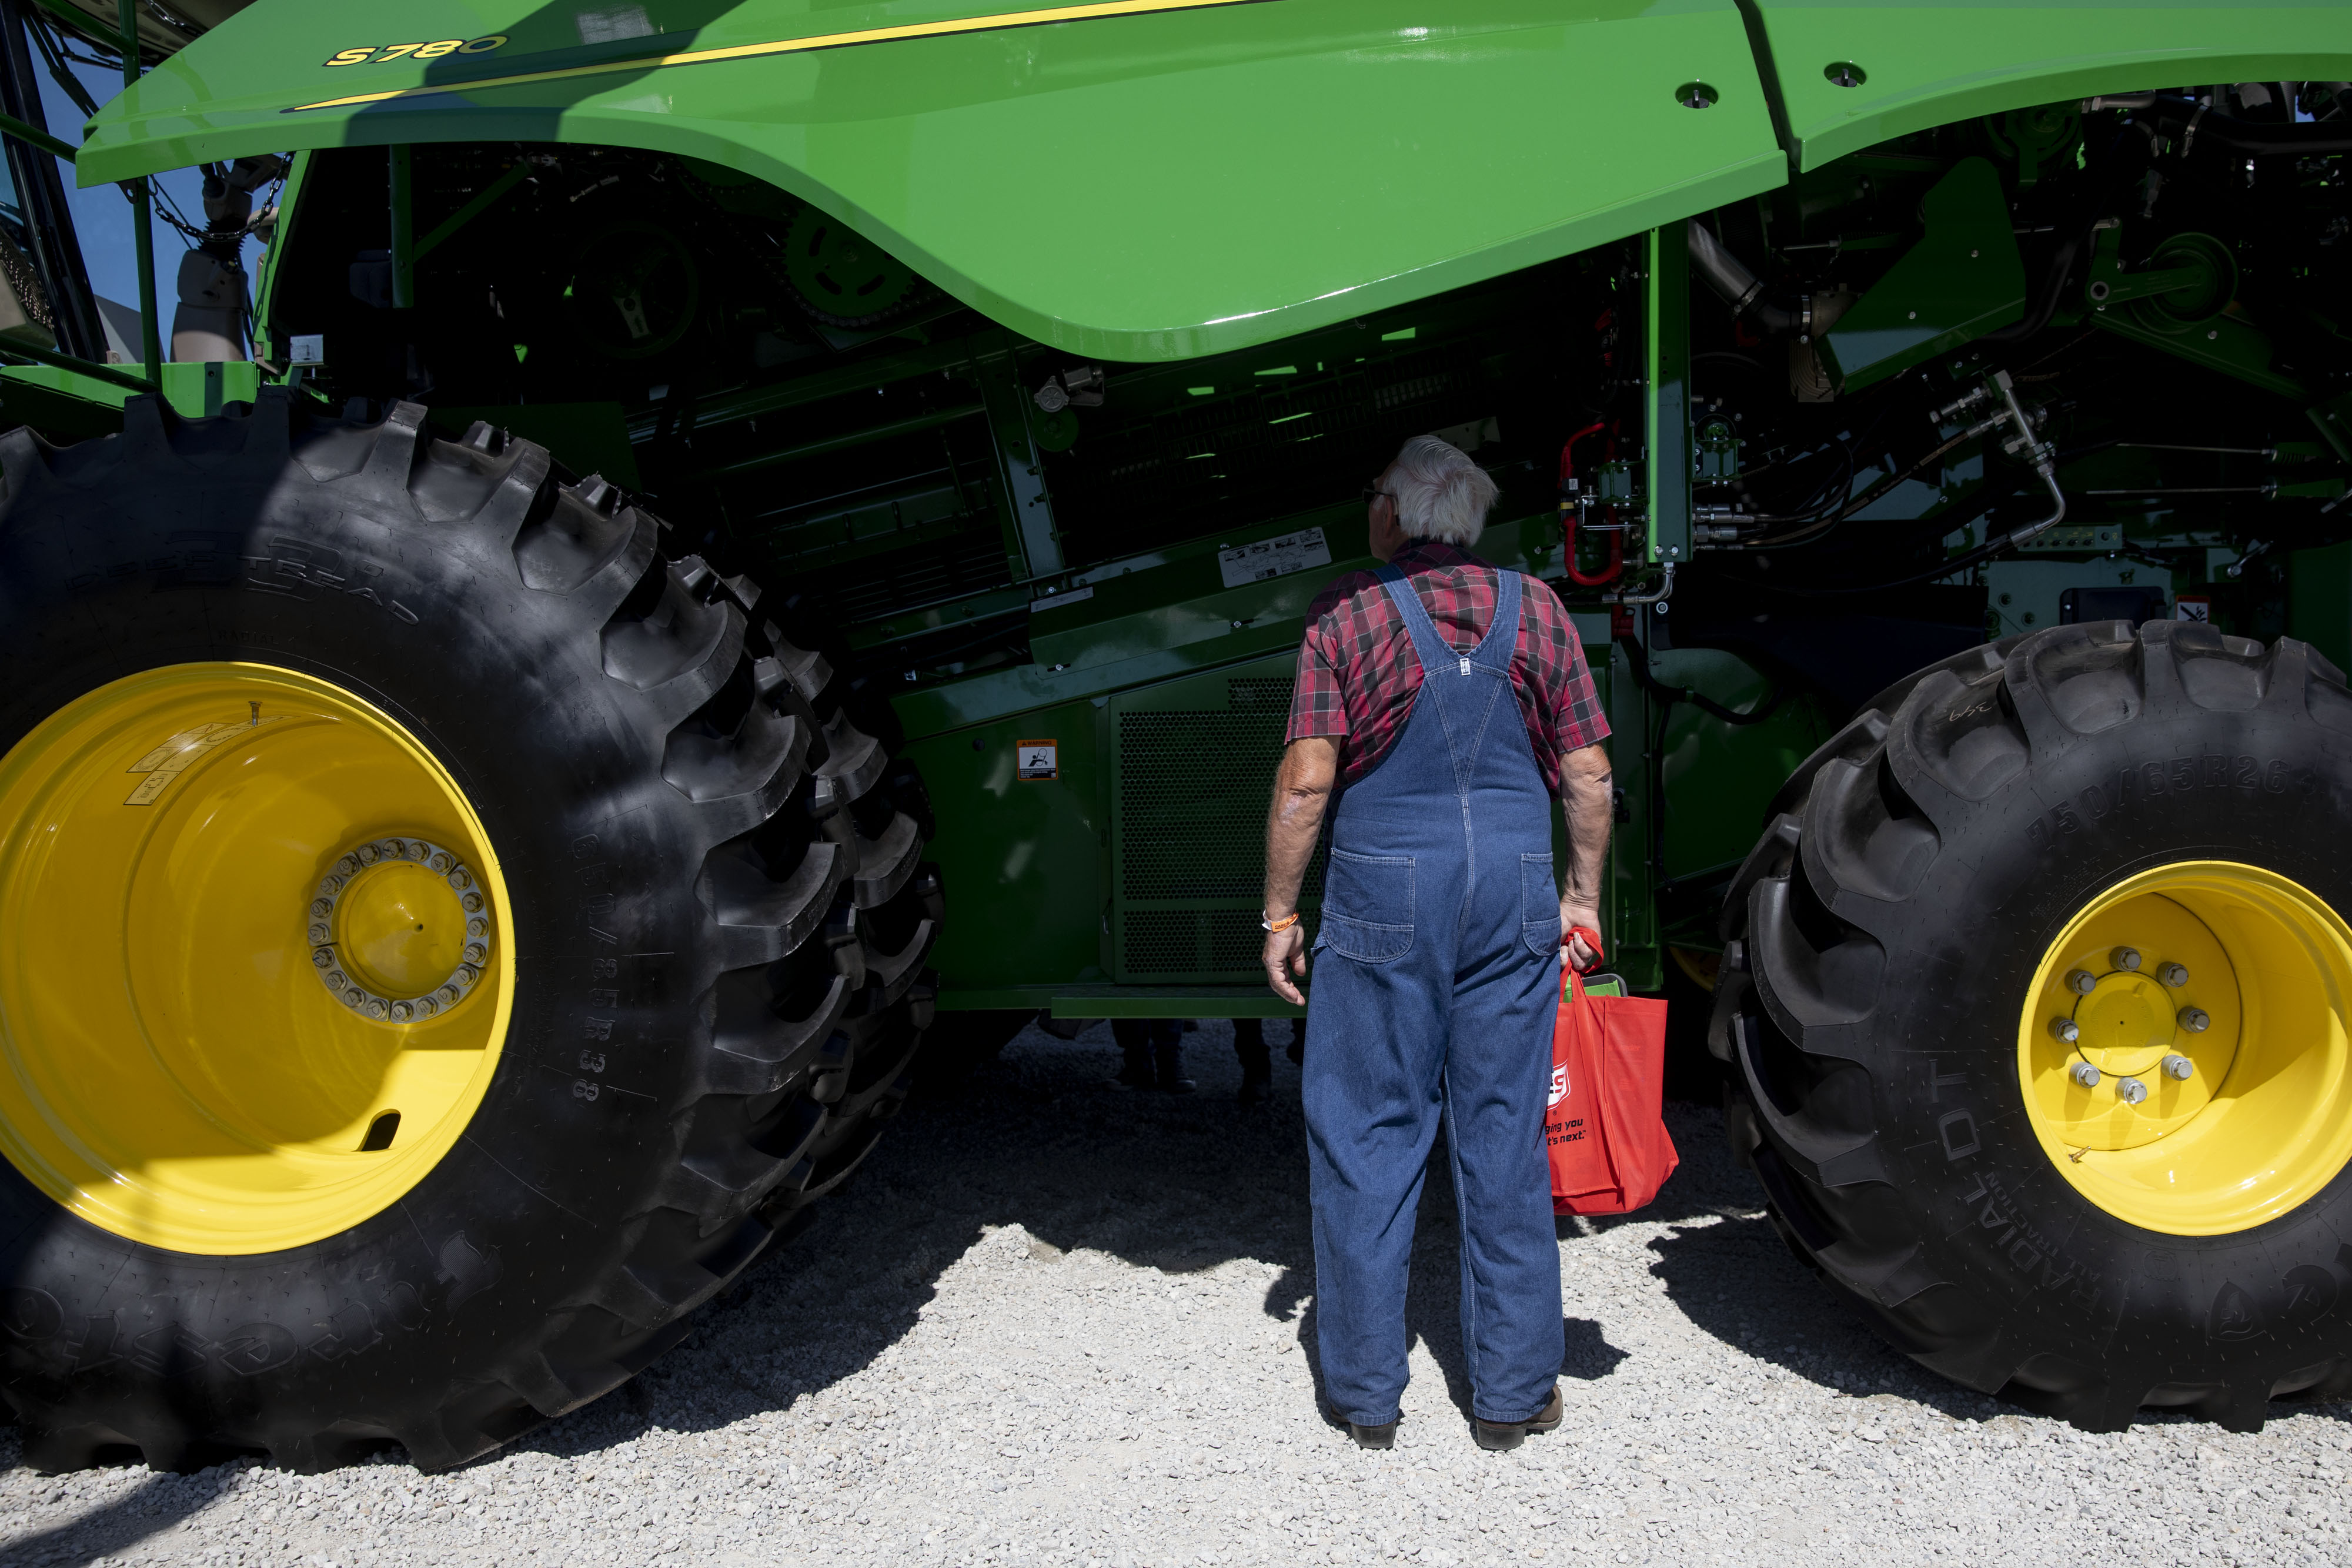 One of the biggest ESG funds in the world has among its holdings Deere &amp; Co., the famous maker of fossil-fuel burning farm equipment.